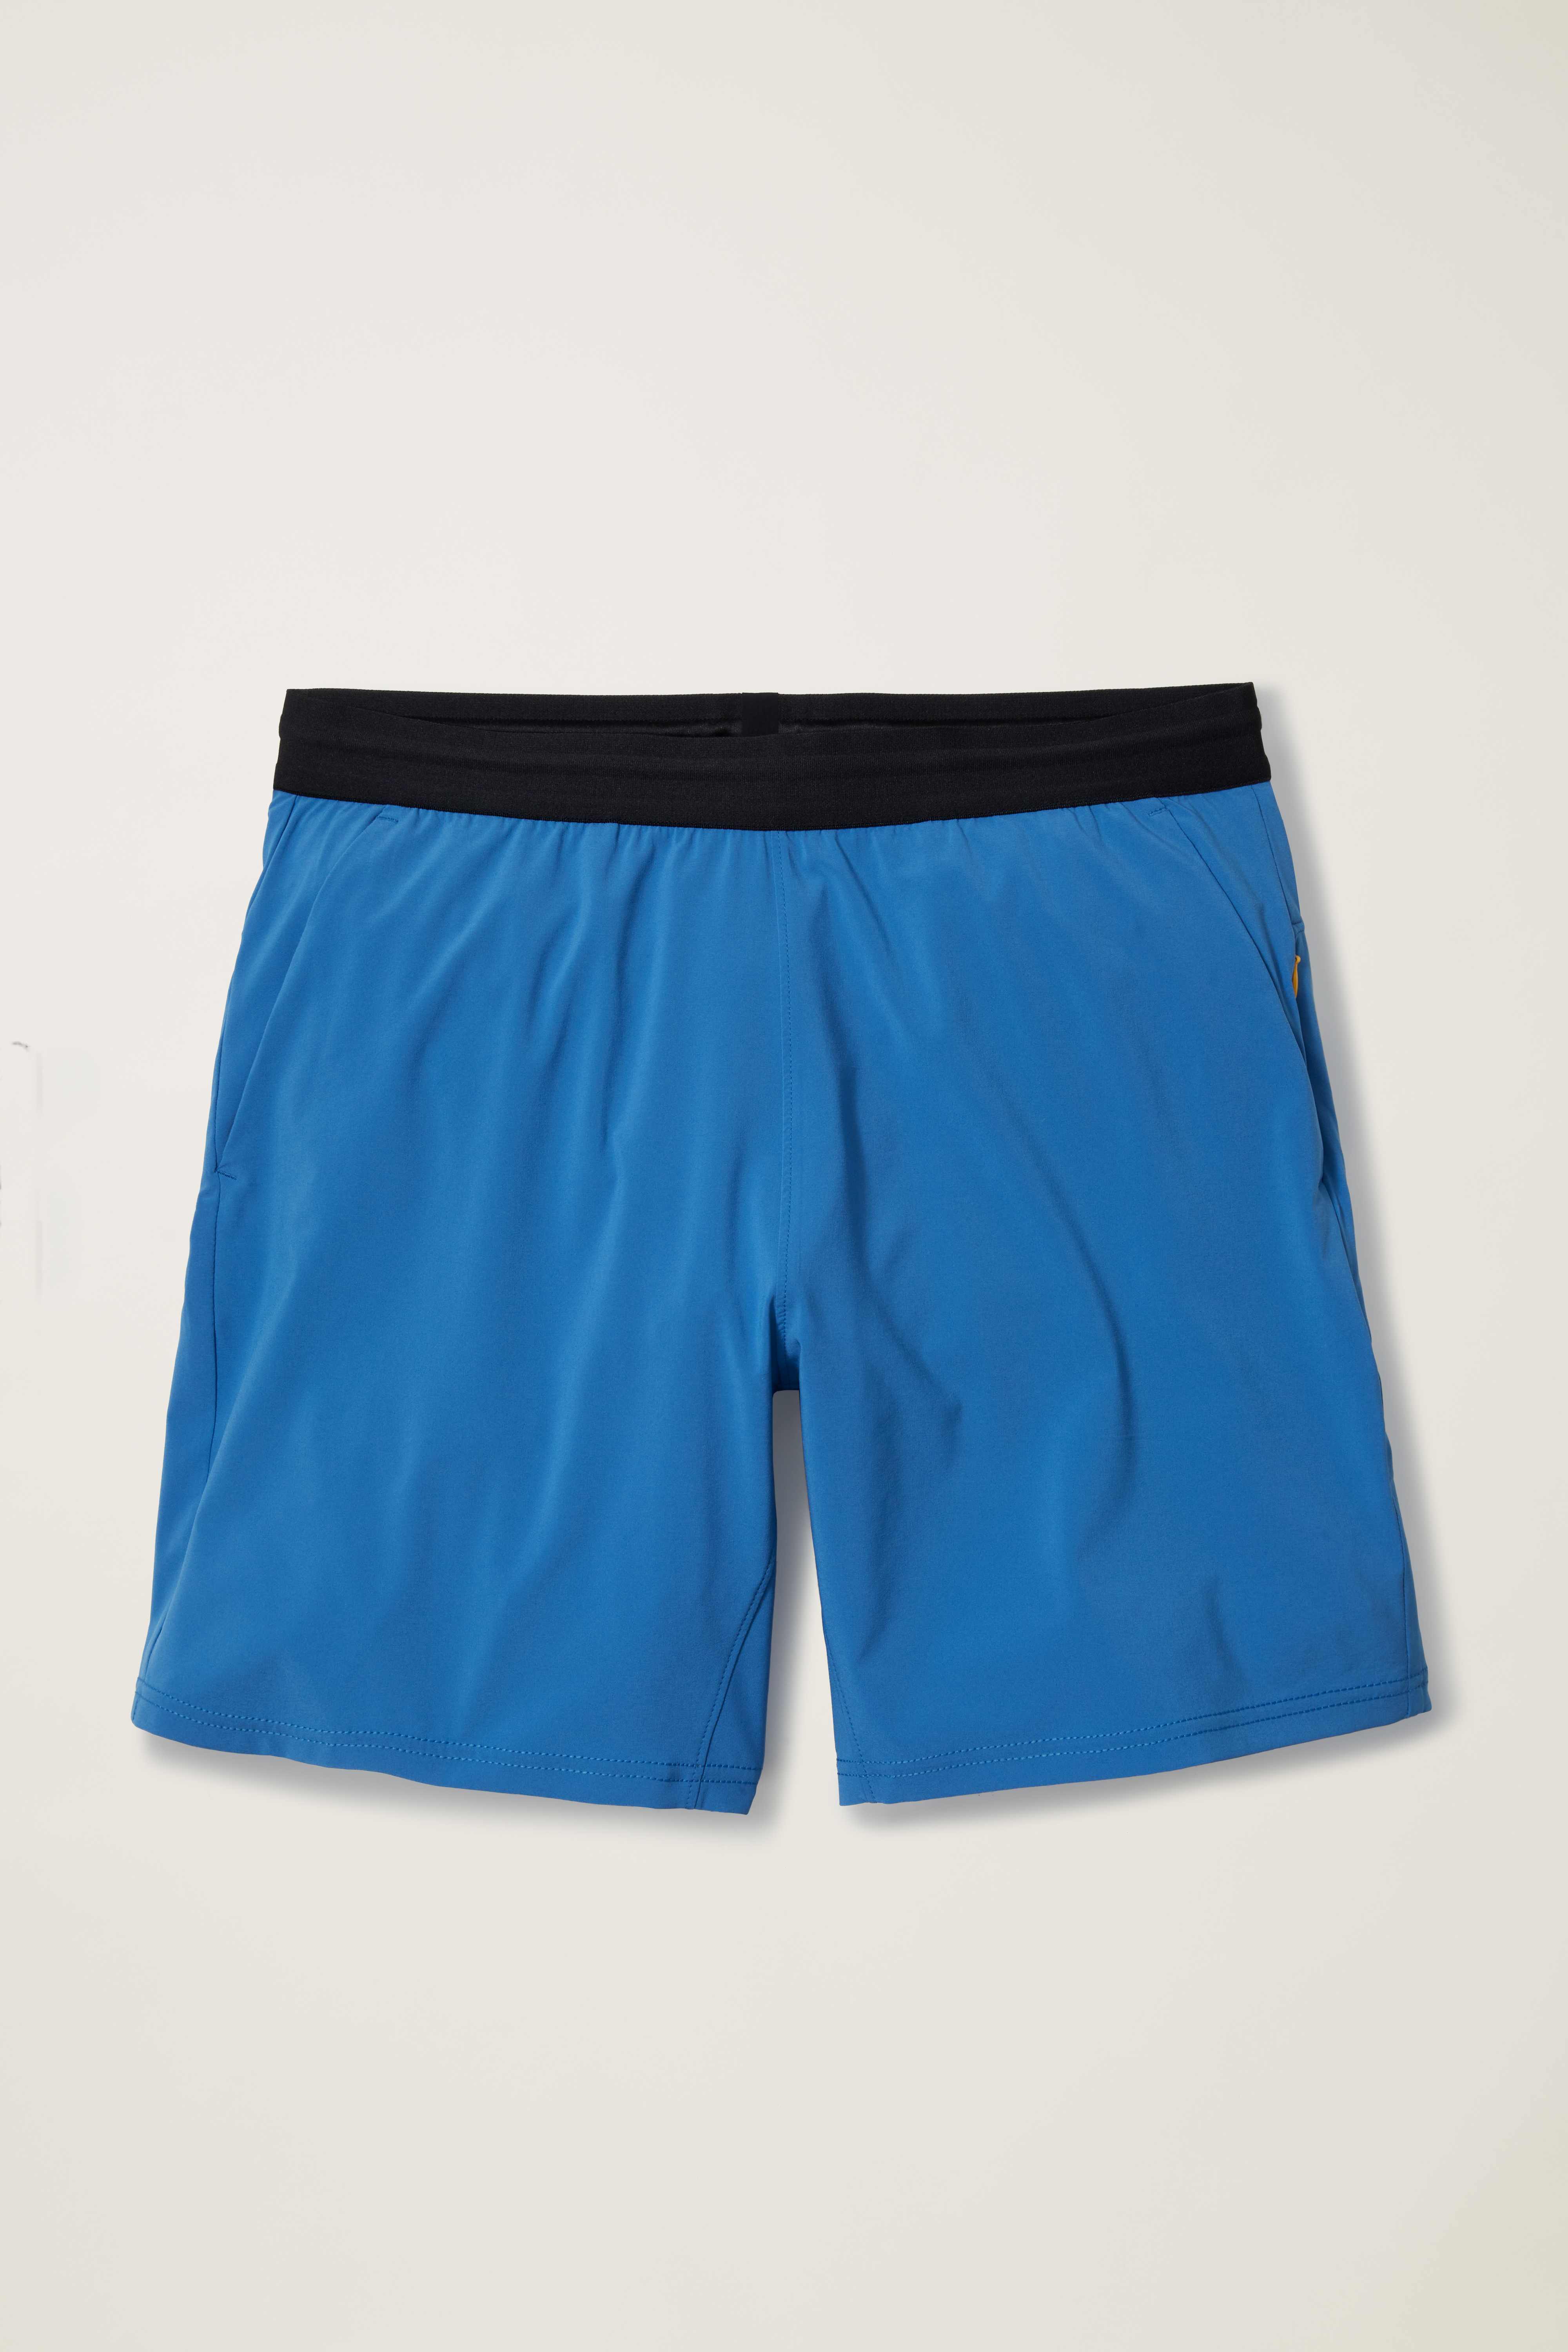 Lululemon athletica Speed Up Low-Rise Lined Short 2.5, Women's Shorts